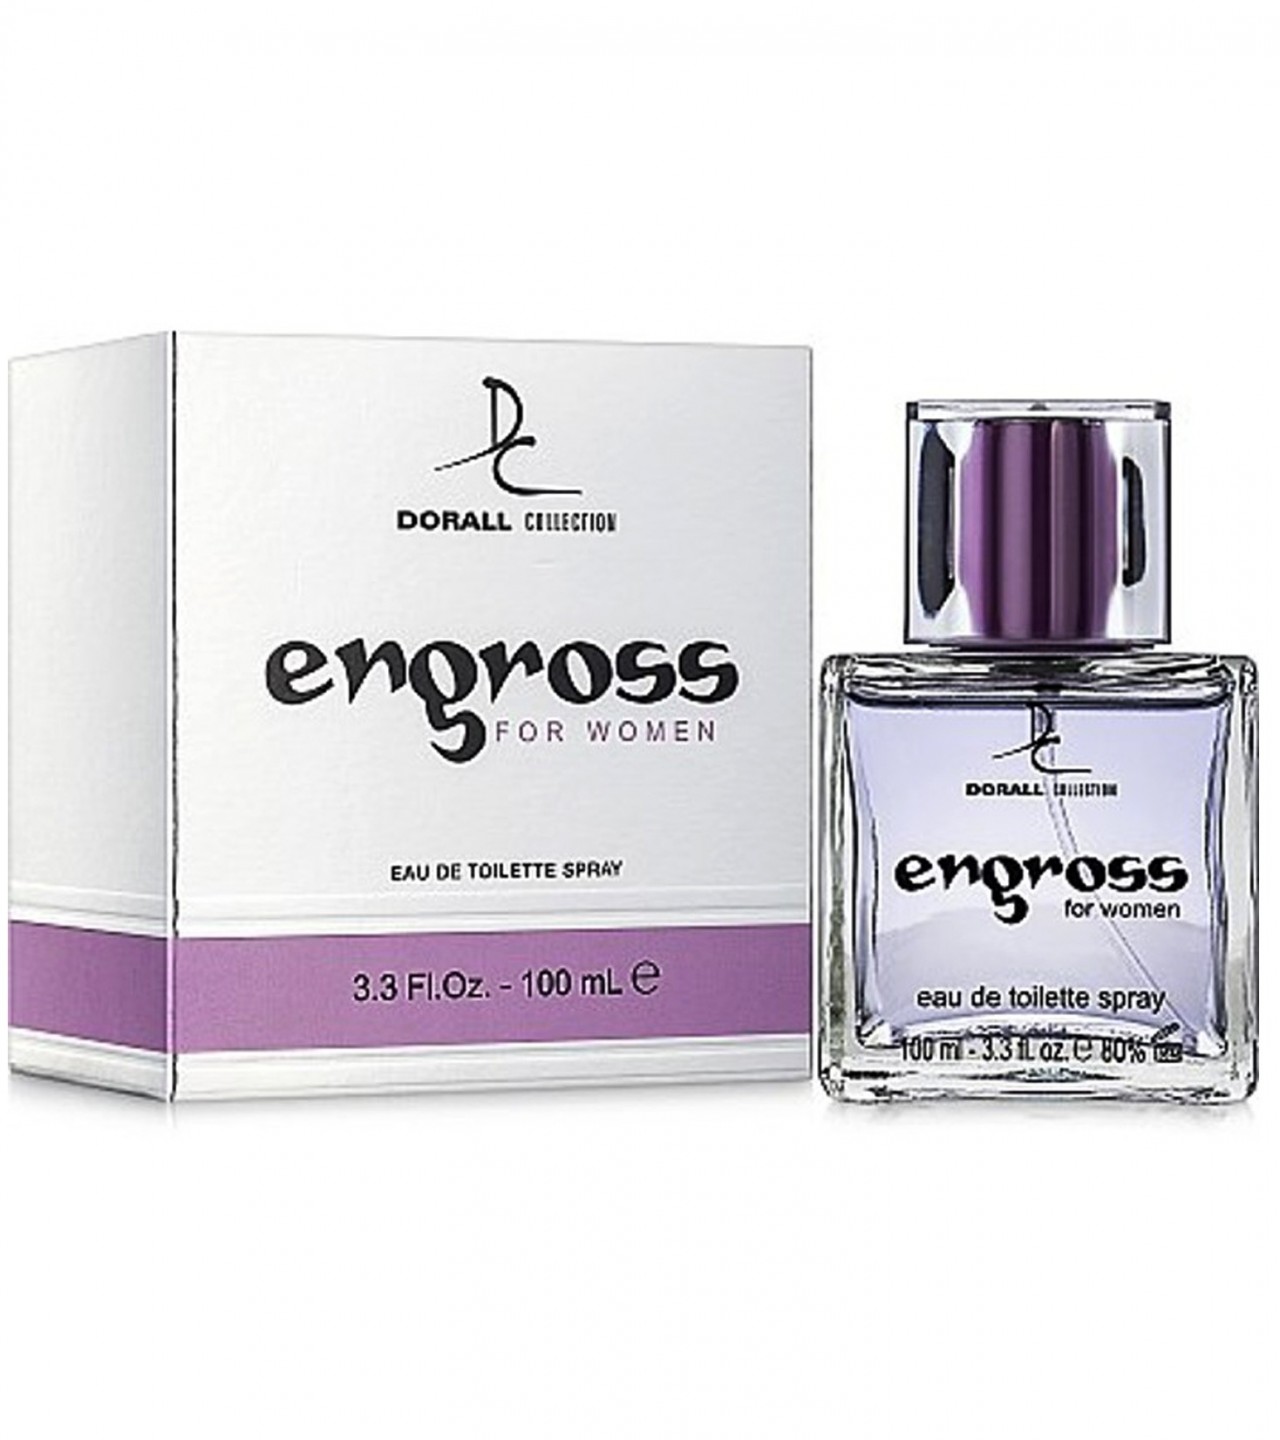 Dorall Collection Engross Perfume For Women – 100 ml